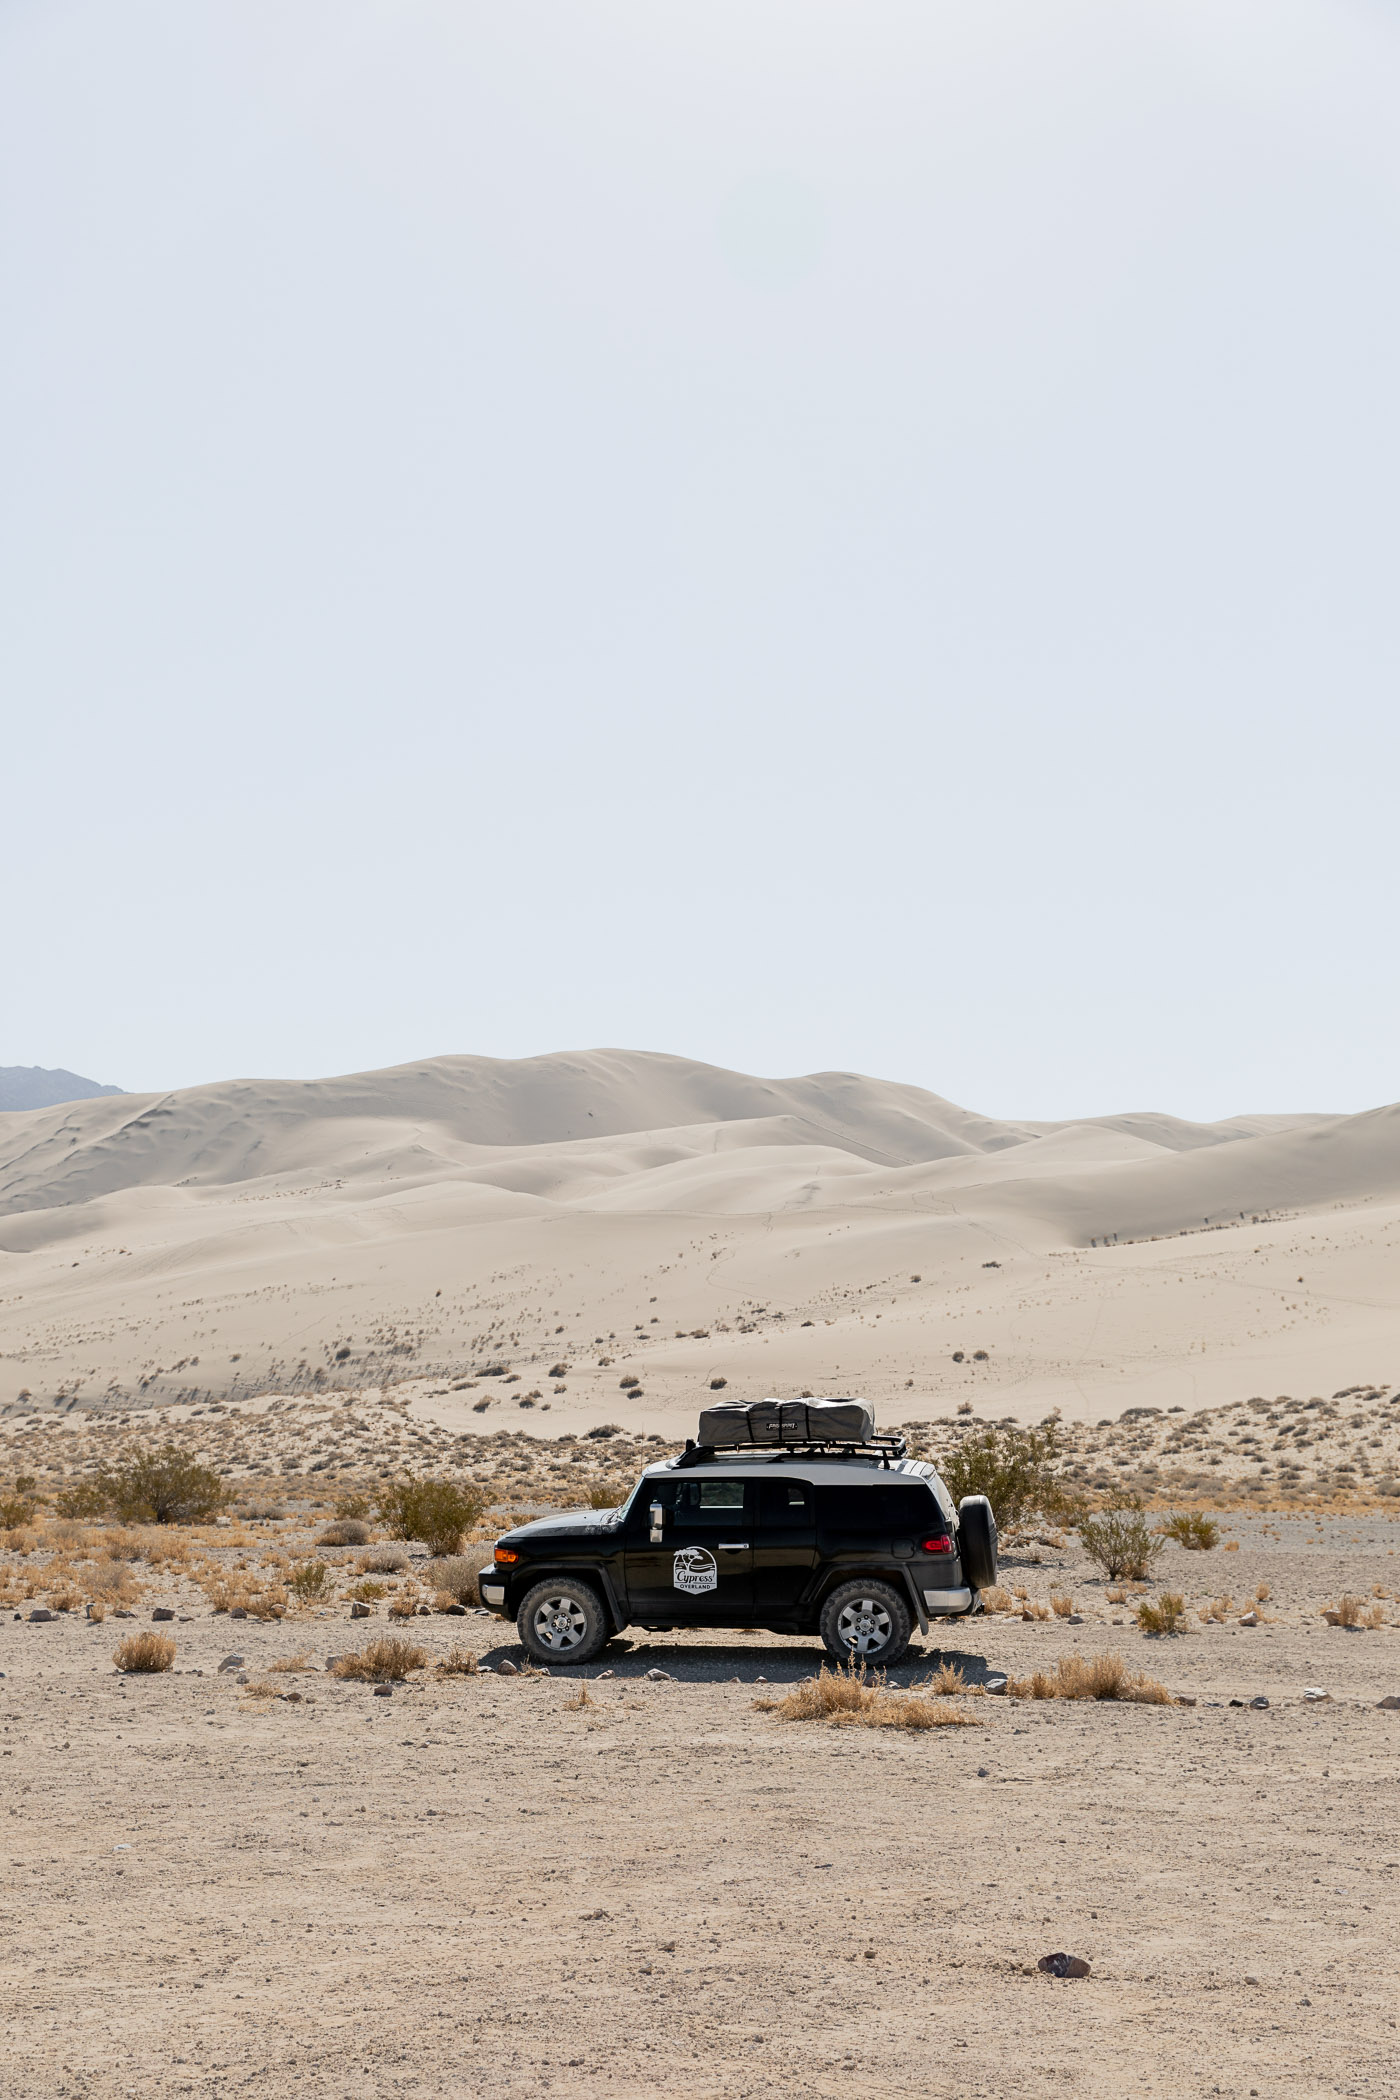 Overlanding 101 at Death Valley National Park's Eureka Dunes - An out-of-this-world road trip through California